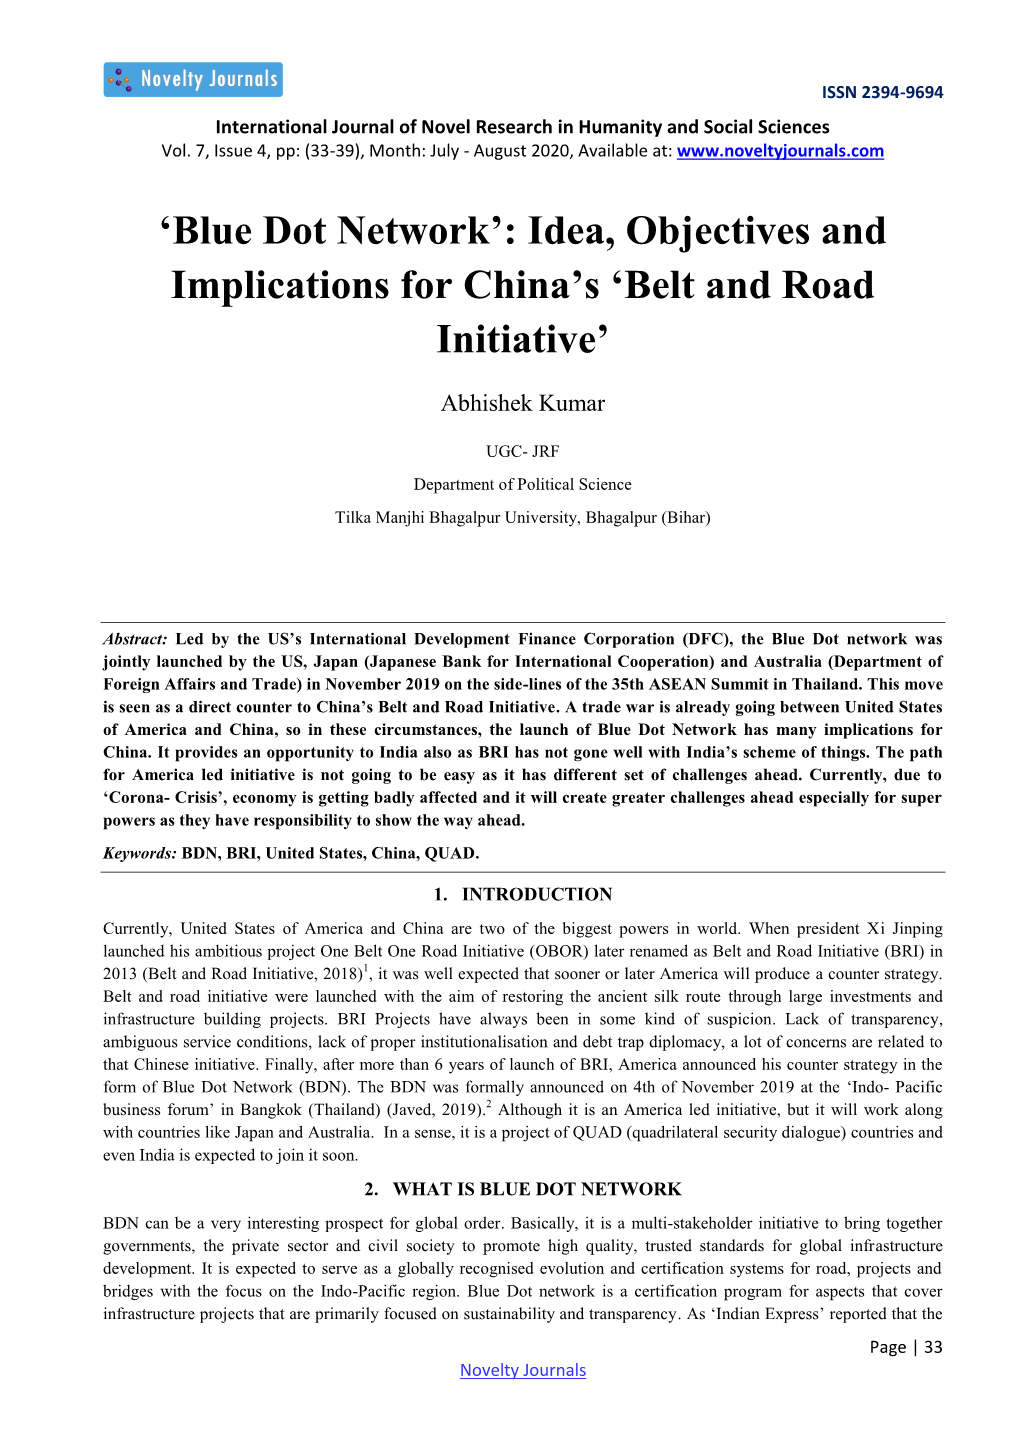 'Blue Dot Network': Idea, Objectives and Implications for China's 'Belt and Road Initiative'